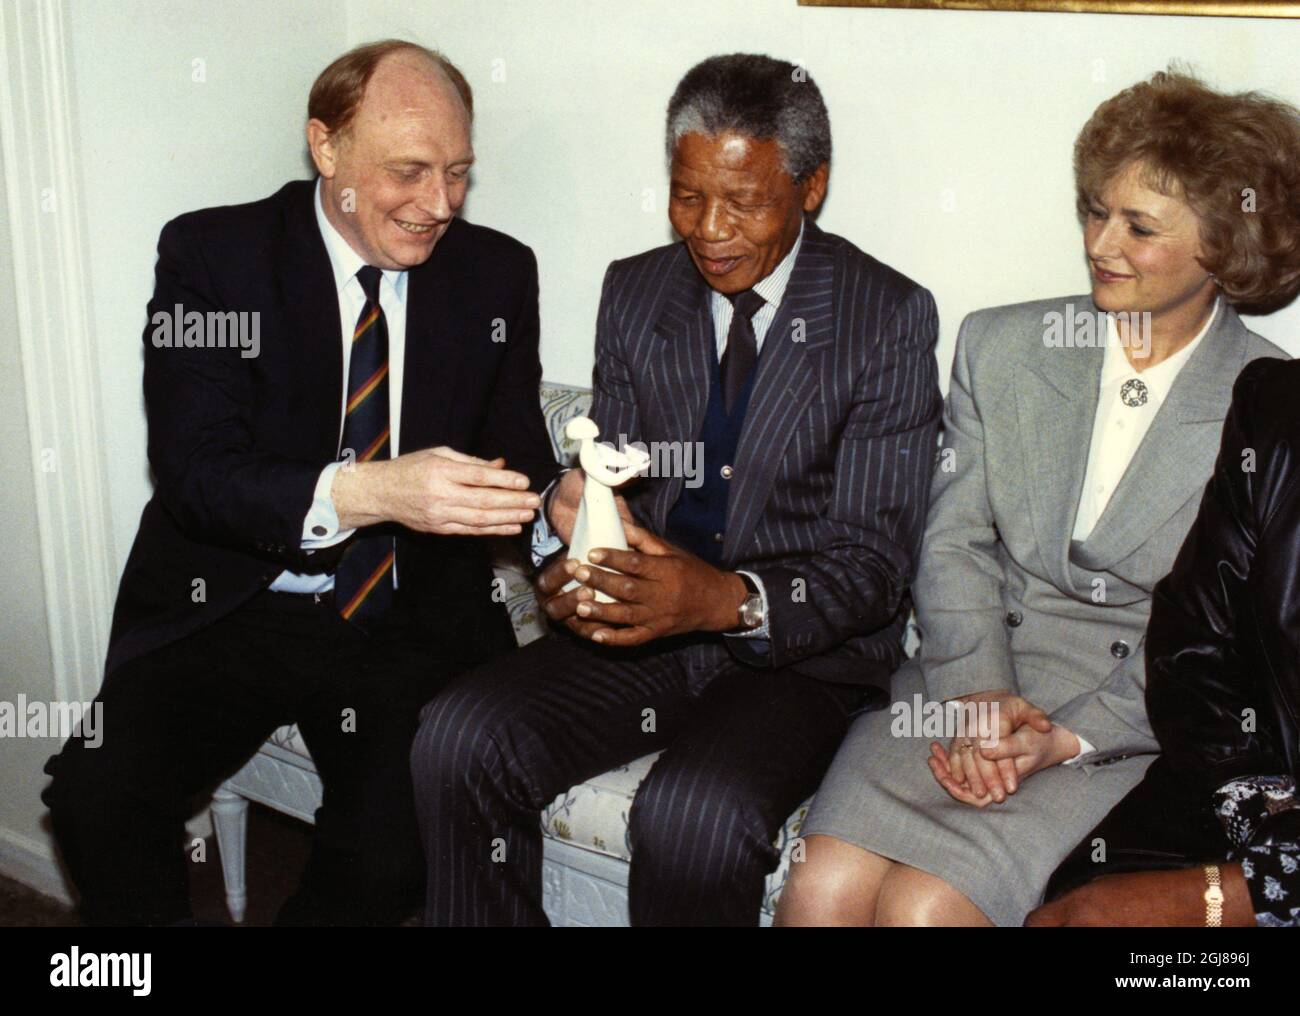 ARKIV MARS 1990 *For your files* ANC- leader Nelson Mandela together with British Labour-ledare Neil Kinnock and his wife Glenys in Stockholm, Sweden, March 12, 1990 Foto: Torbjorn F Gustafsson / Reportagebild / SCANPIX / Kod: 37770  Stock Photo